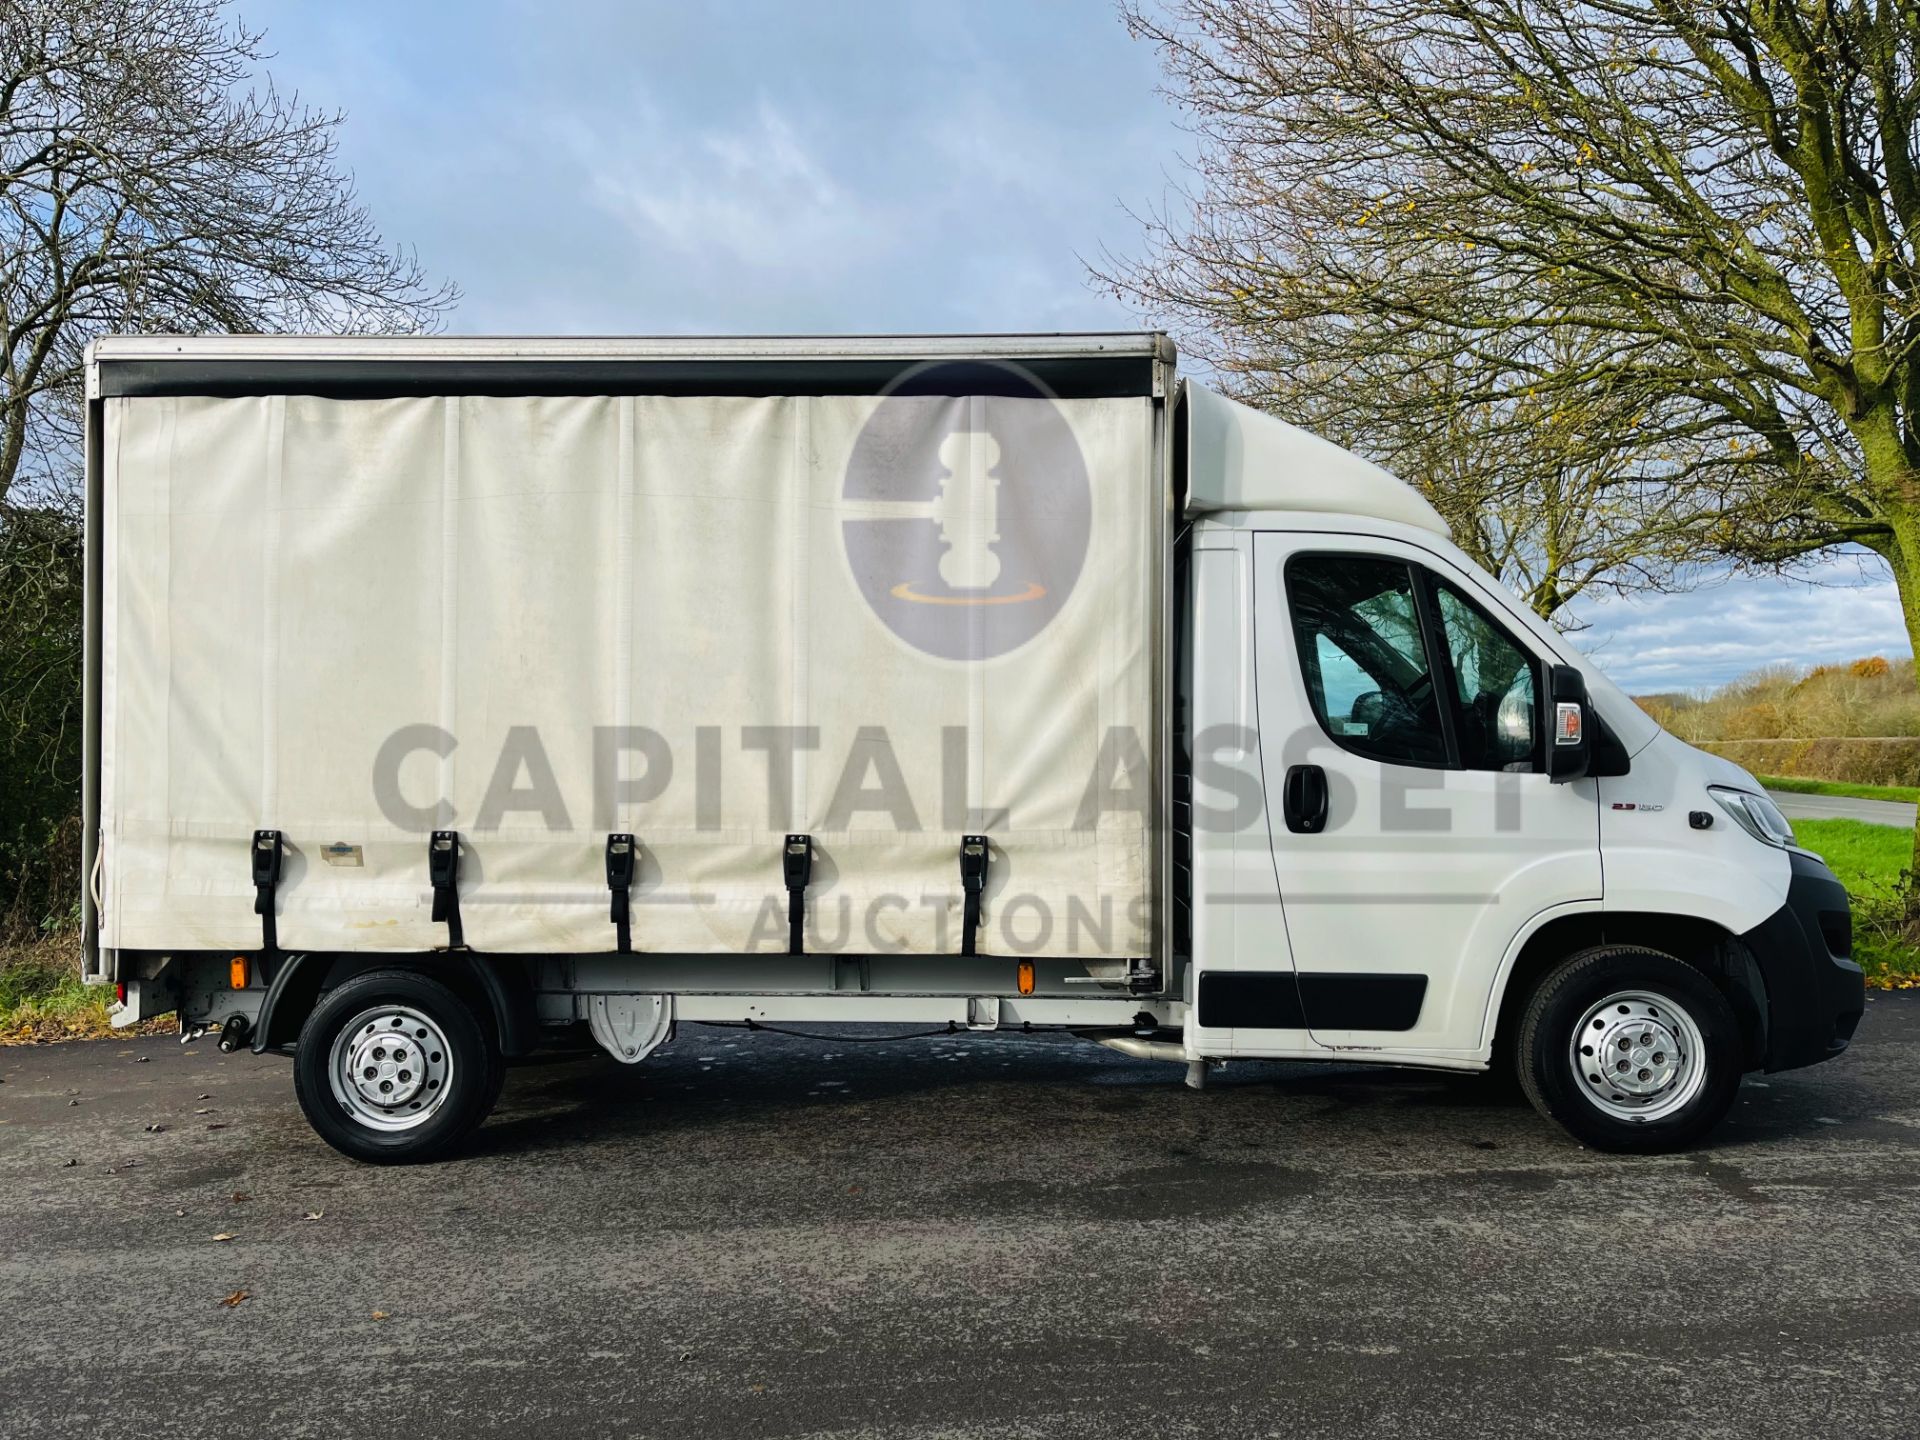 (ON SALE) FIAT DUCATO 2.3 MULTIJET (2019 MODEL) RARE CURTAIN SIDE BODY - 1 OWNER - 360 CAMERA VIEW - Image 11 of 24